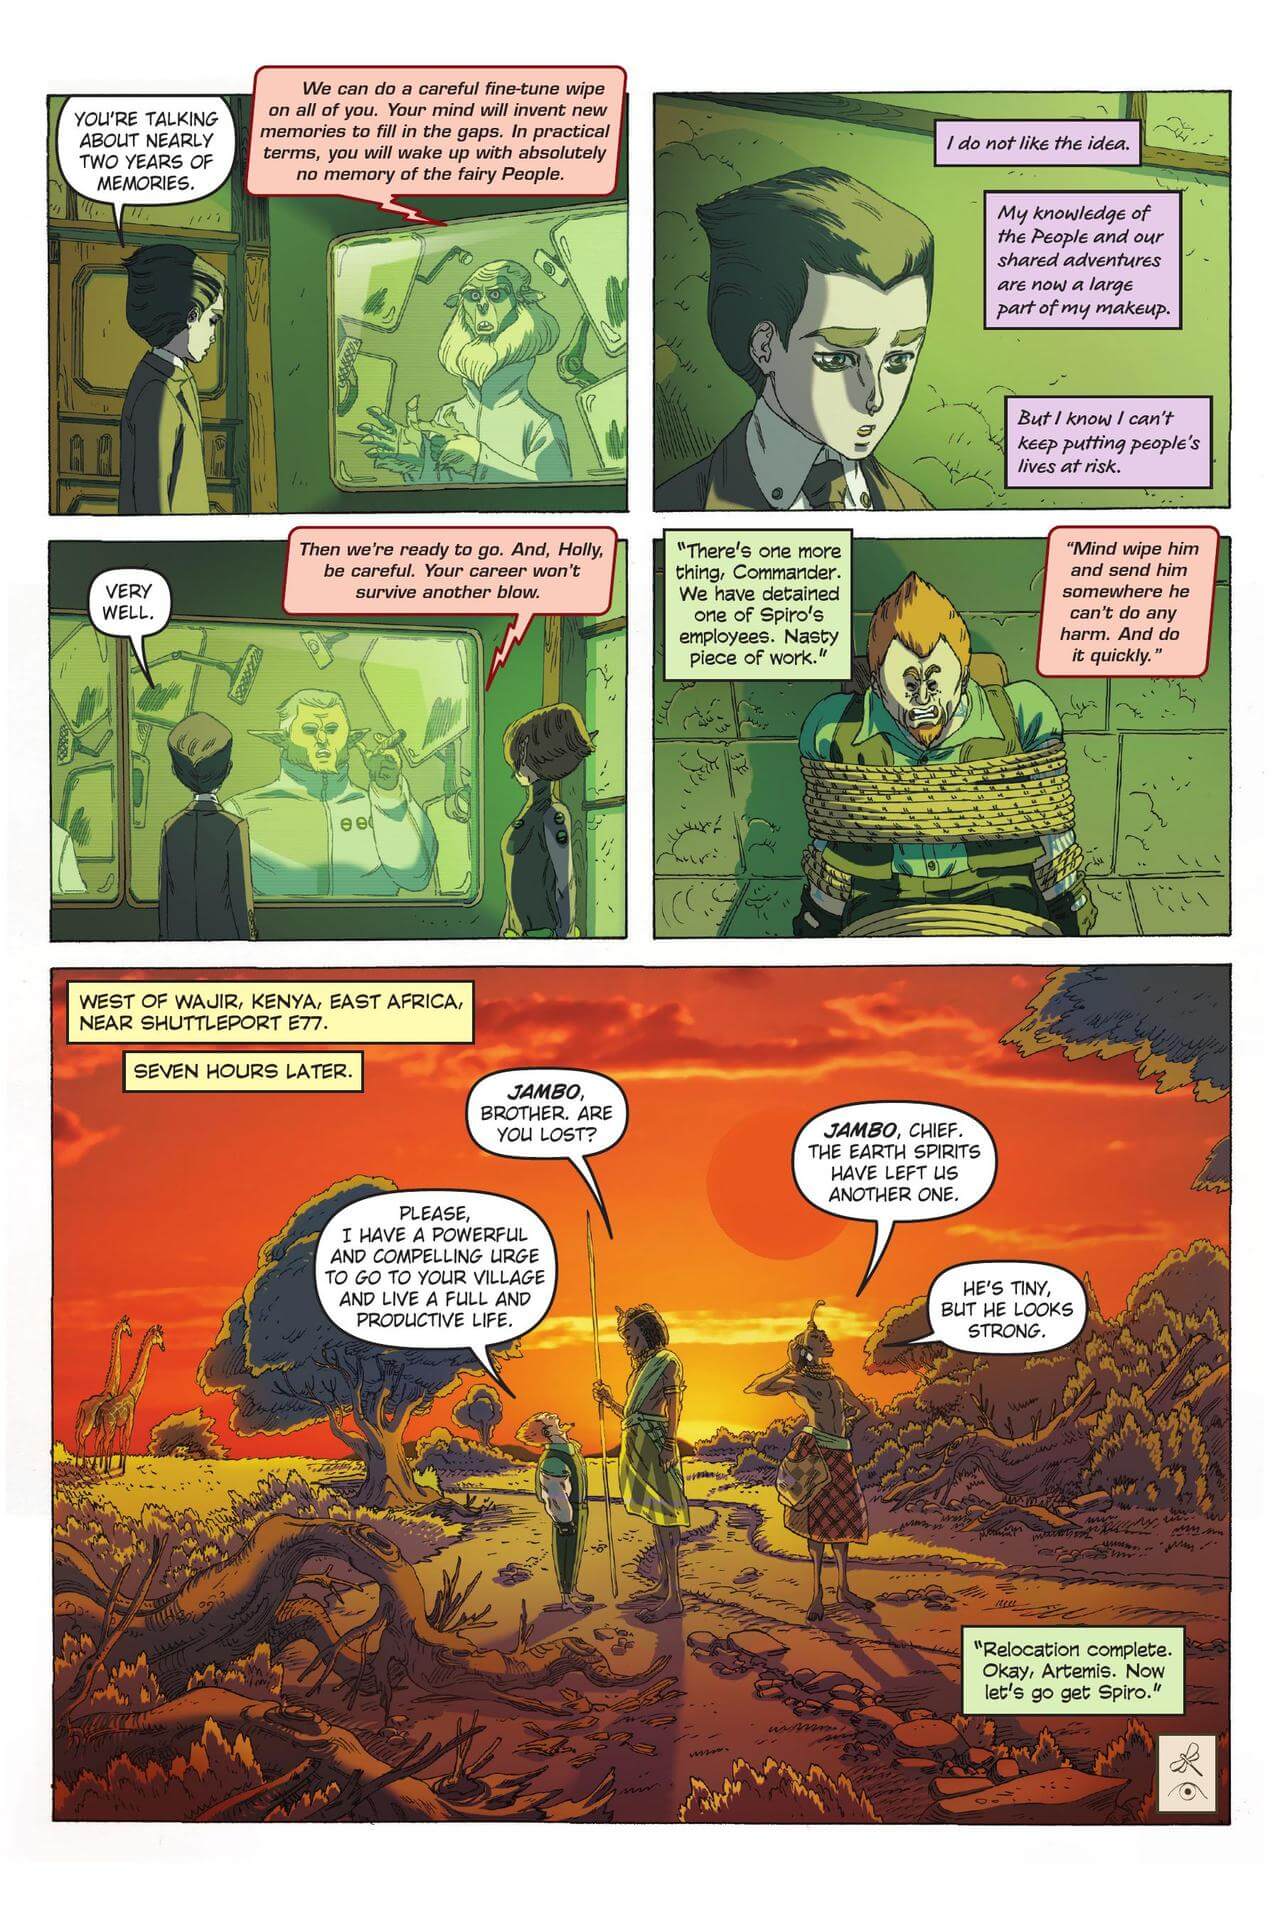 page 63 of artemis fowl eternity code graphic novel